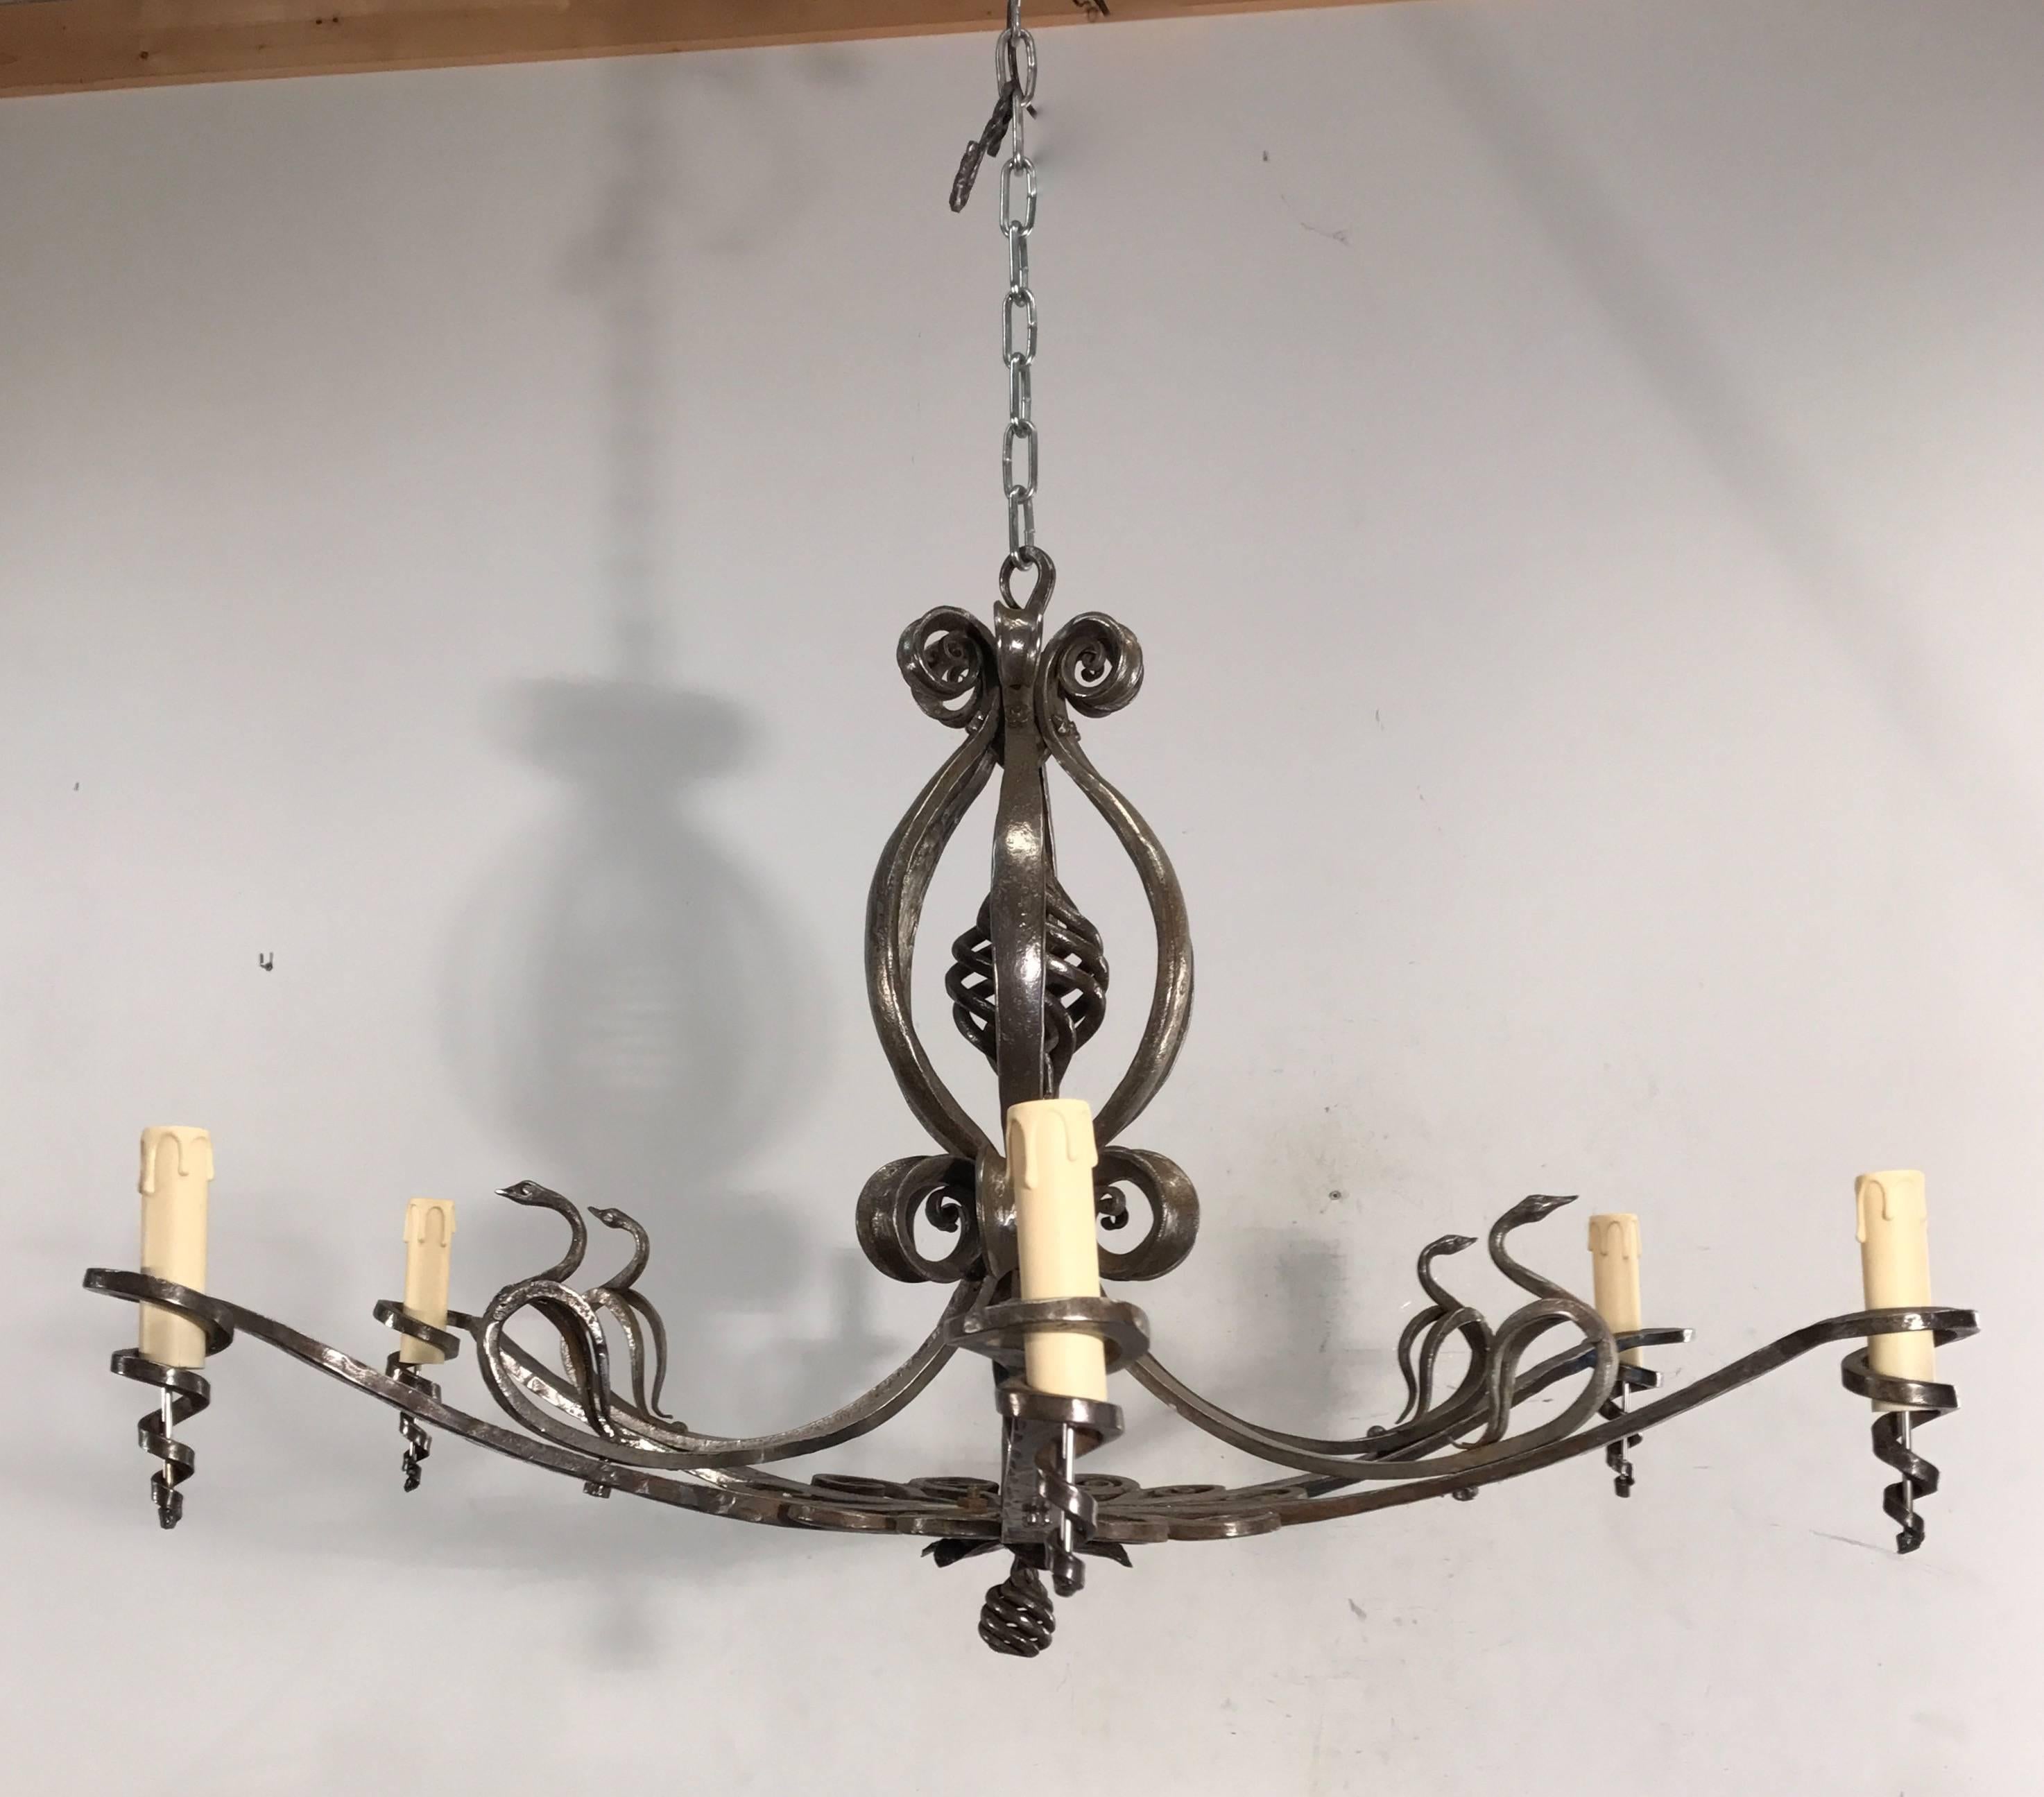 Wonderful antique and handcrafted six-light chandelier.

If you are searching for an elegant and unique chandelier to, for example, complete a dining room or a large entrance then this handcrafted work of art should be on your shortlist. This